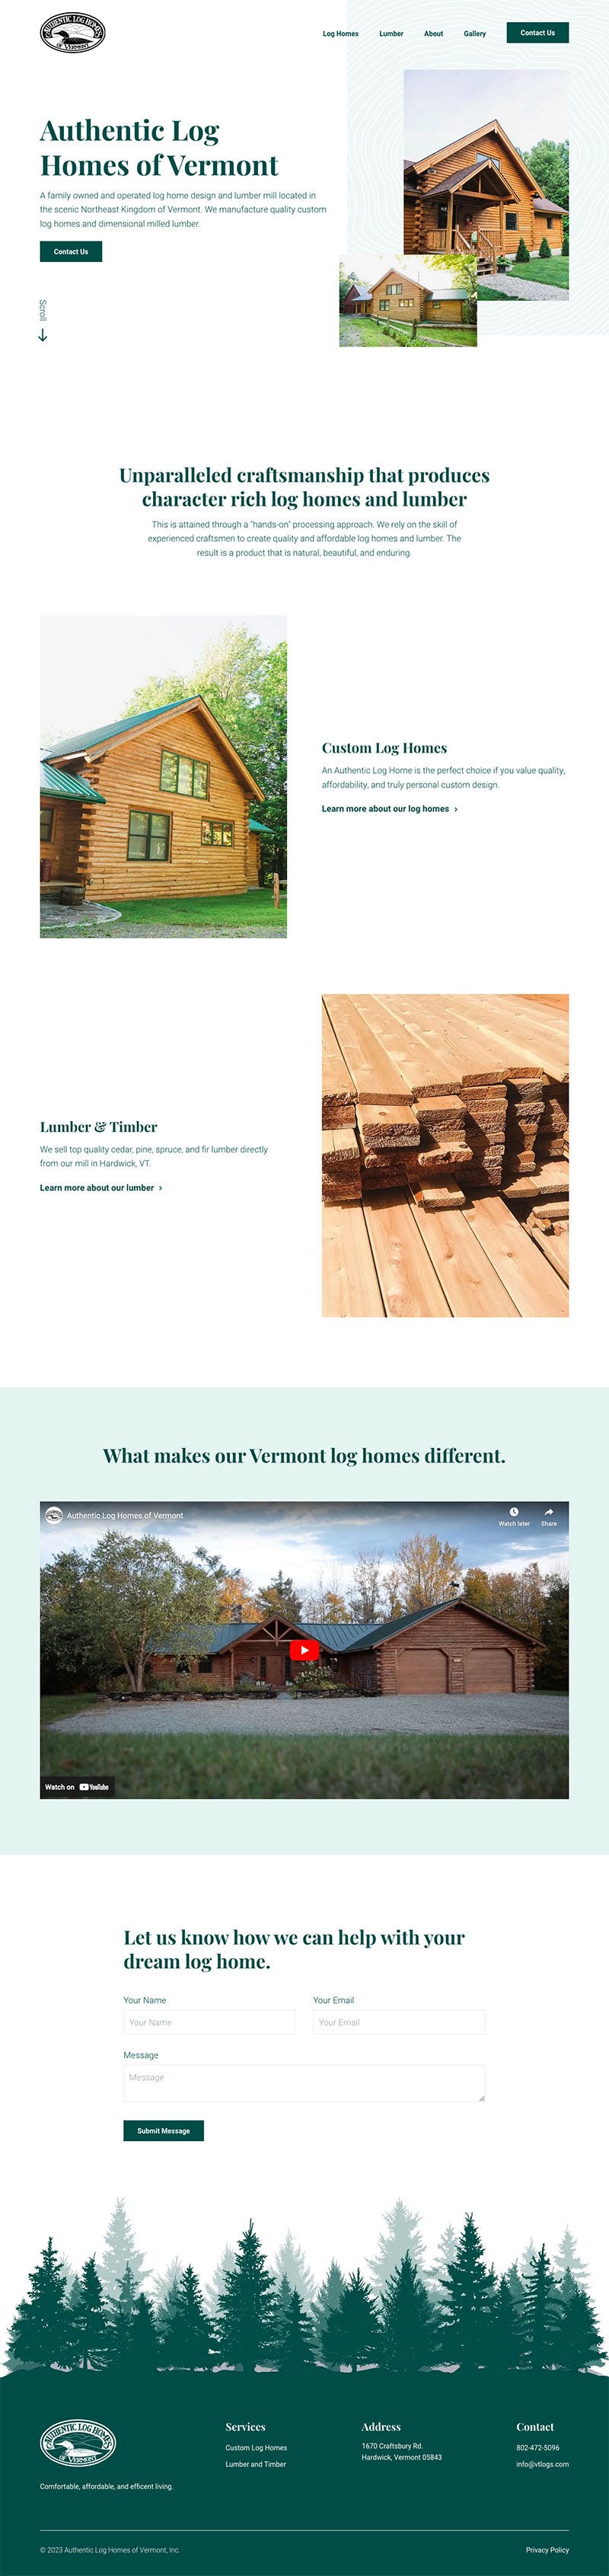 mockup next generation web design for Authentic Log Homes of Vermont